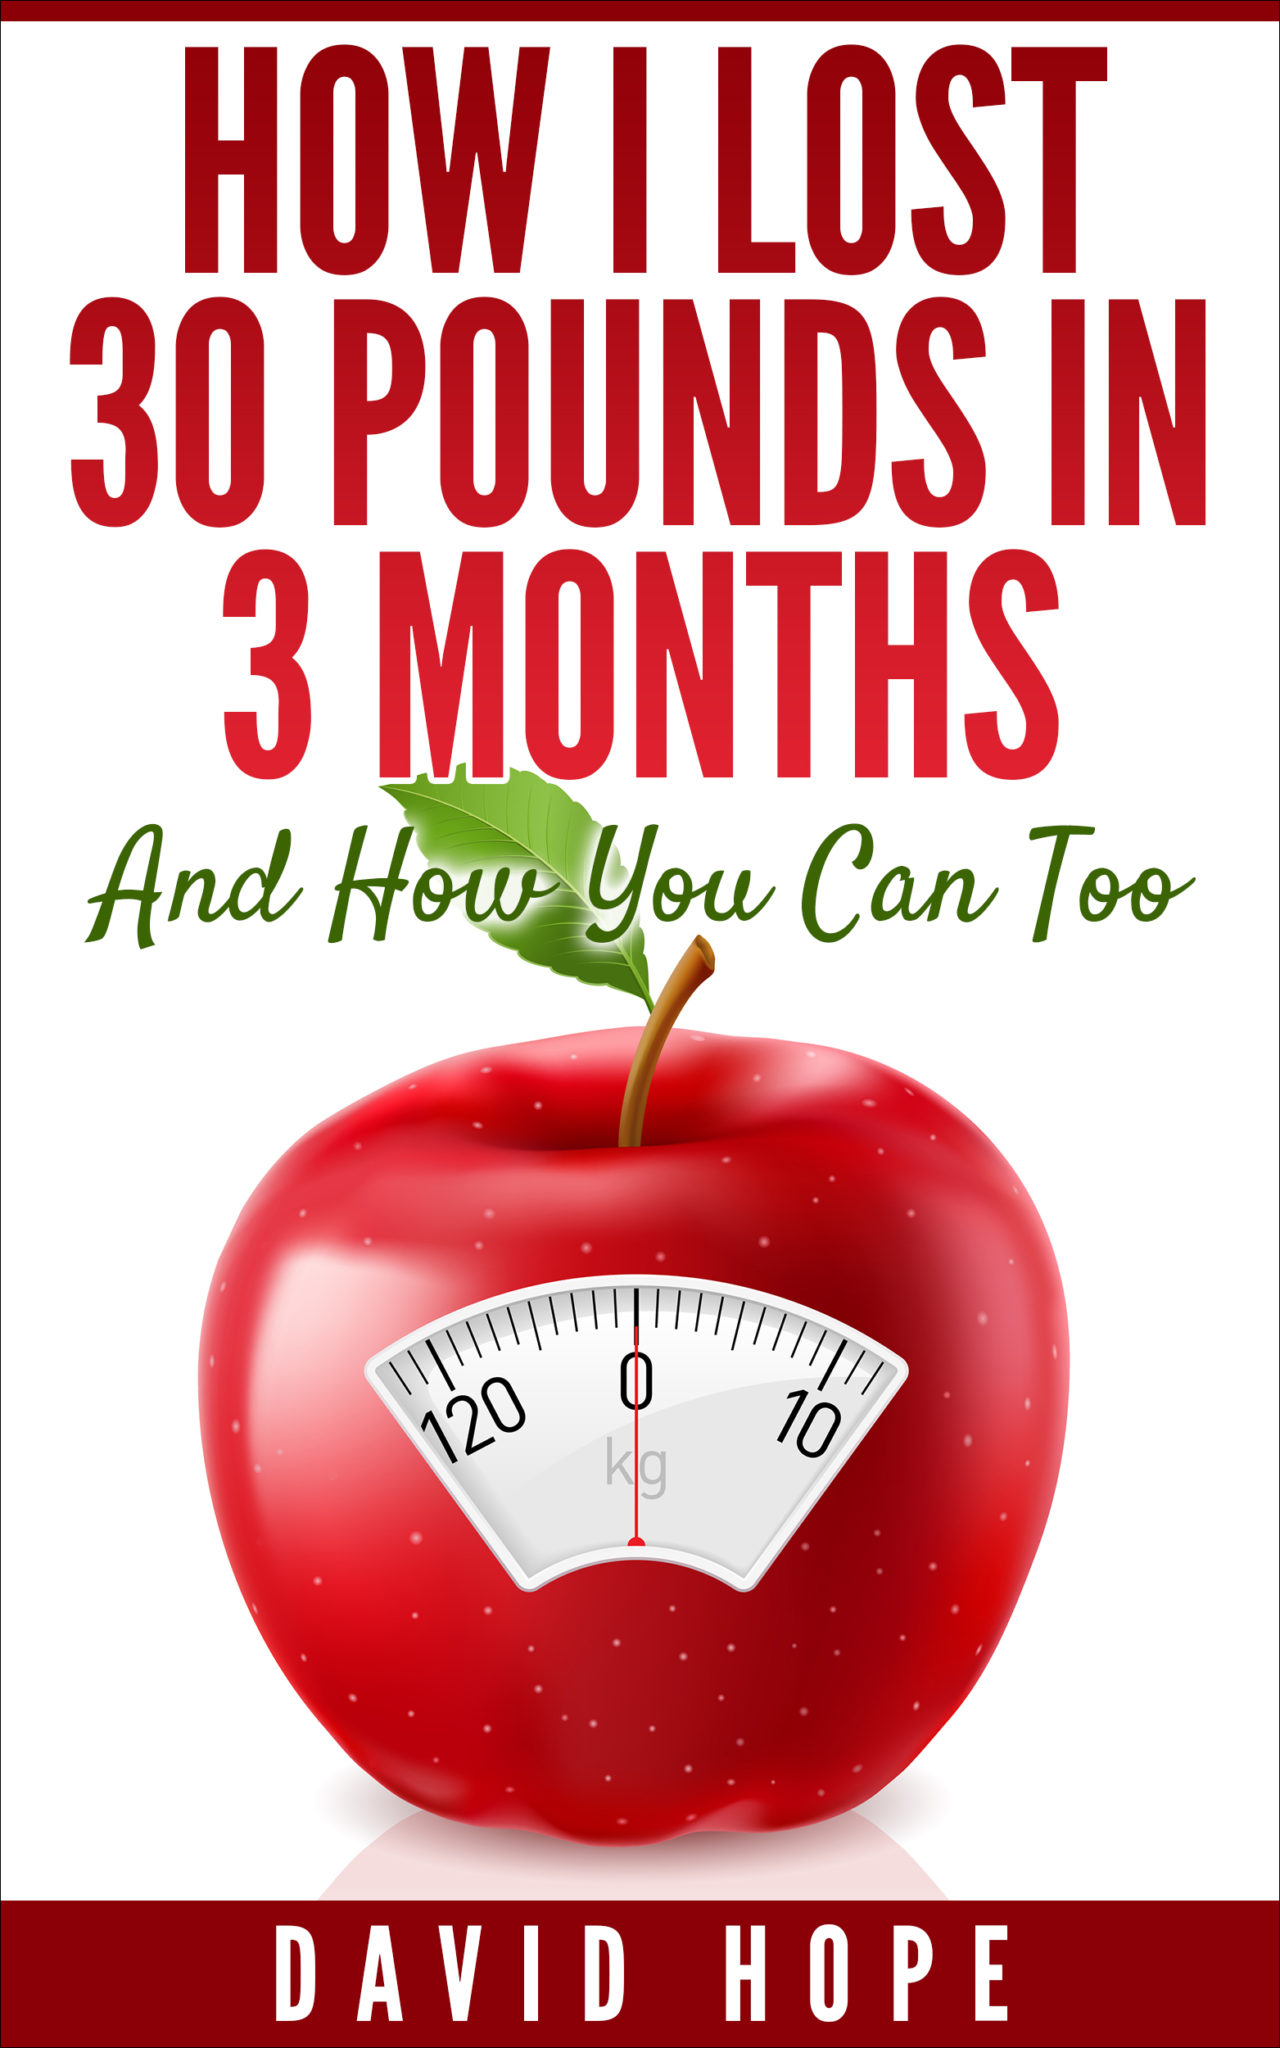 FREE: How I Lost 30 Pounds In 3 Months: And How You Can Too by David Hope